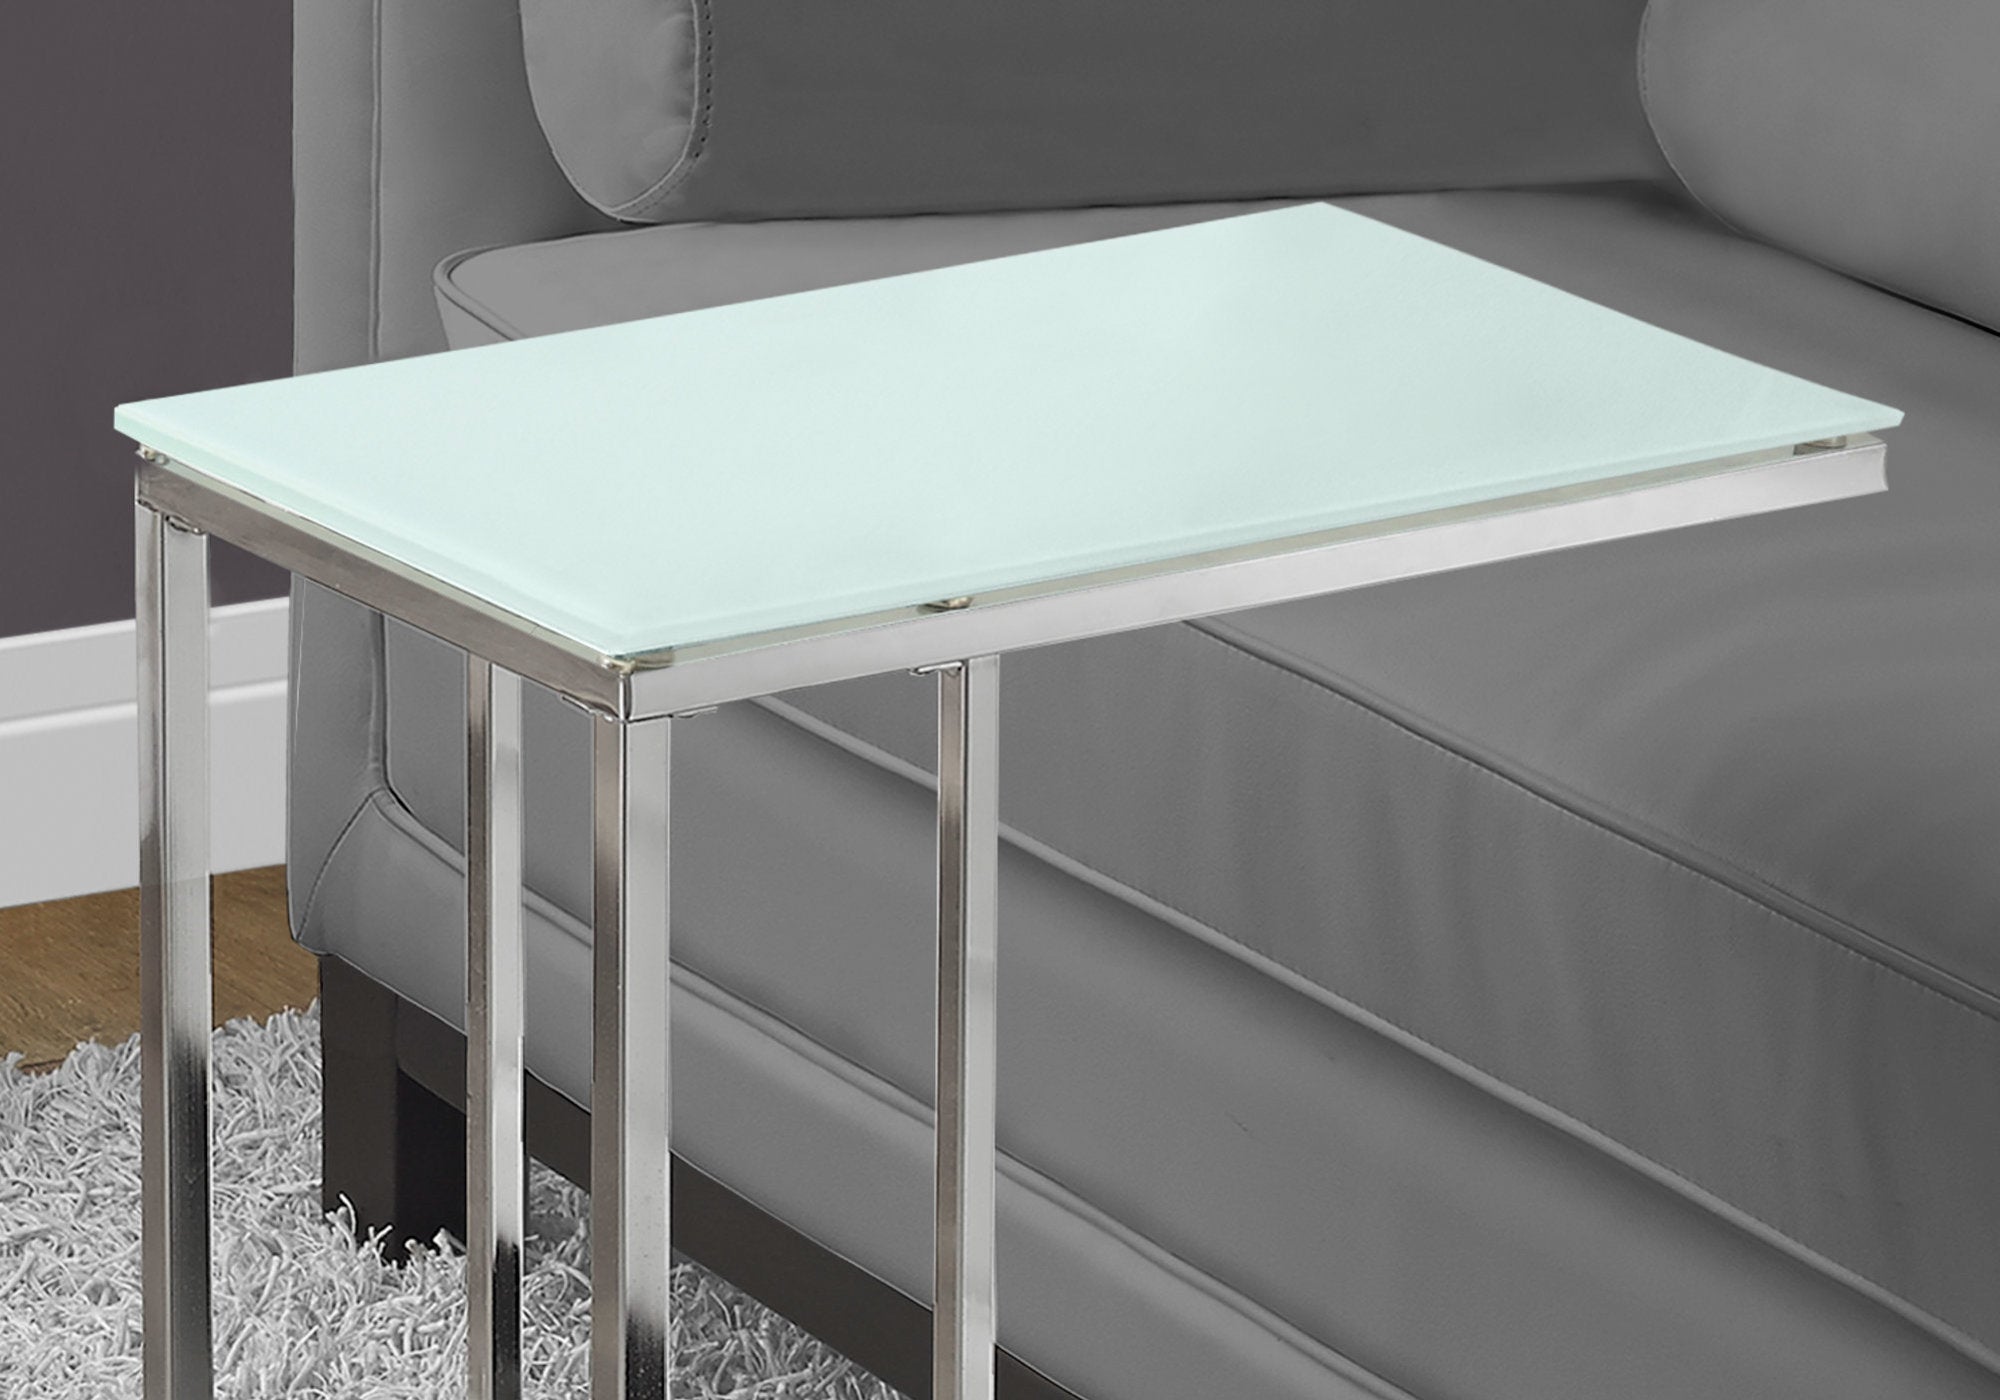 18.25" X 10.25" X 24" Chrome Metal Tempered Glass Accent Table